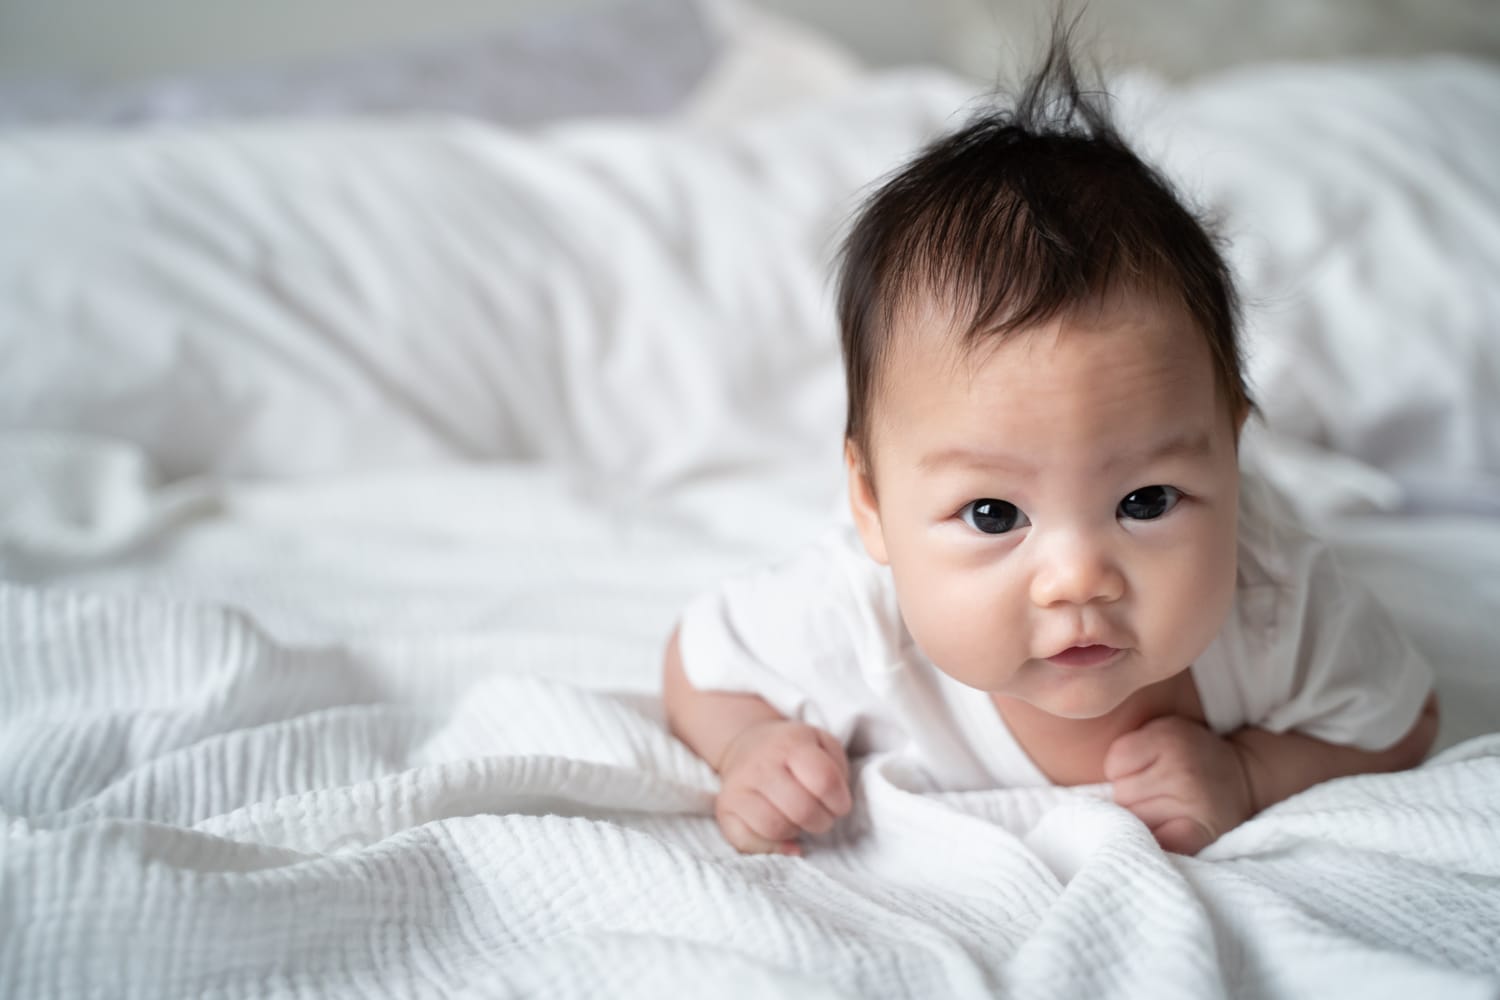 Asian baby crawling, Nirsevimab is a one-time shot that helps protect babies from getting very sick with RSV. All babies up to 7 months of age should get one dose.